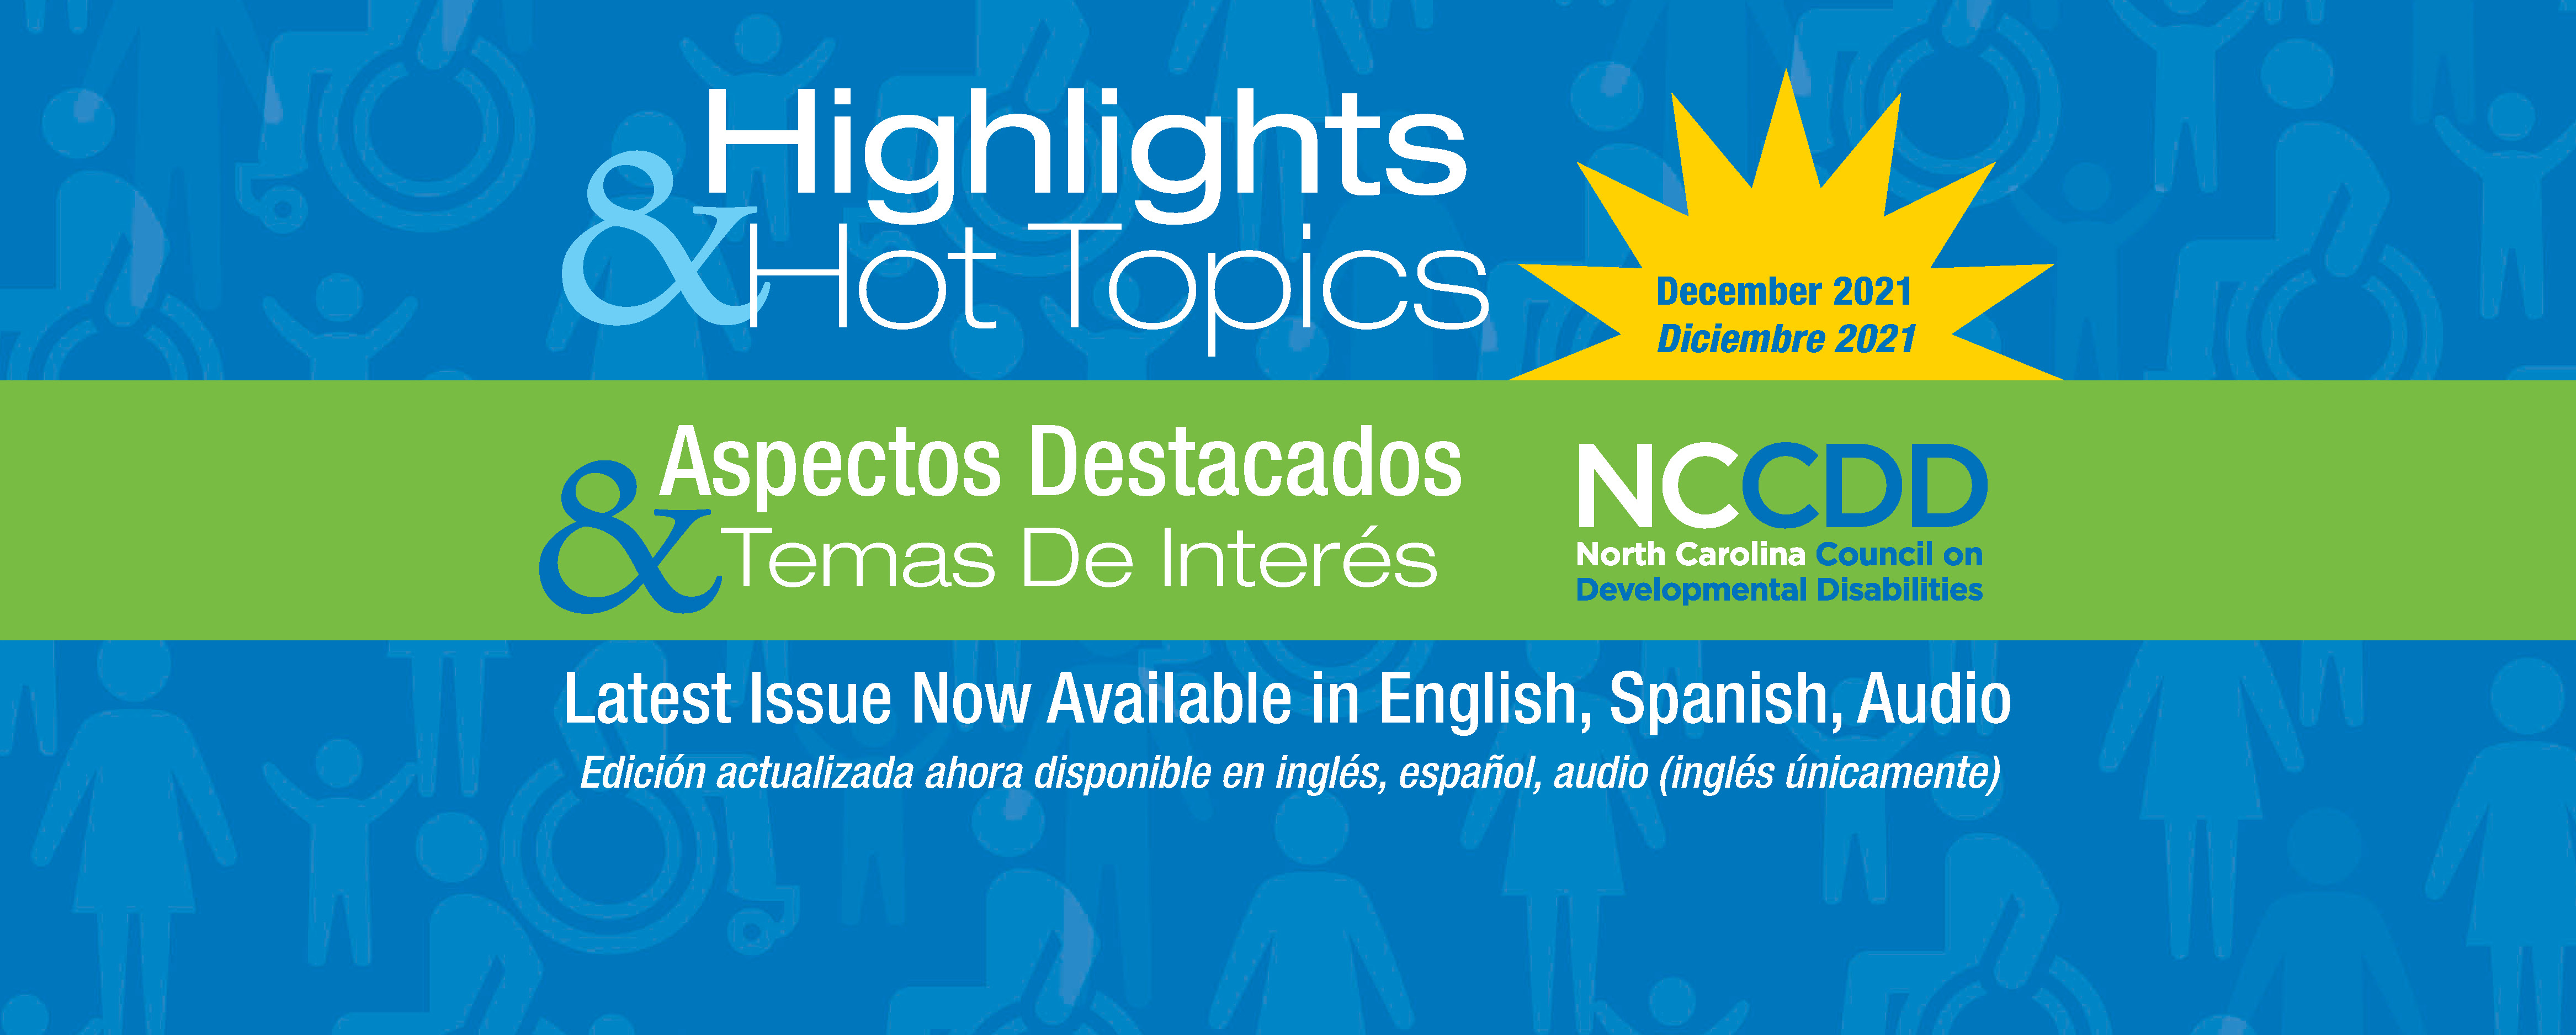 Highlights & Hot Topics! Latest Issue Now Available in English, Audio, Spanish version coming soon!